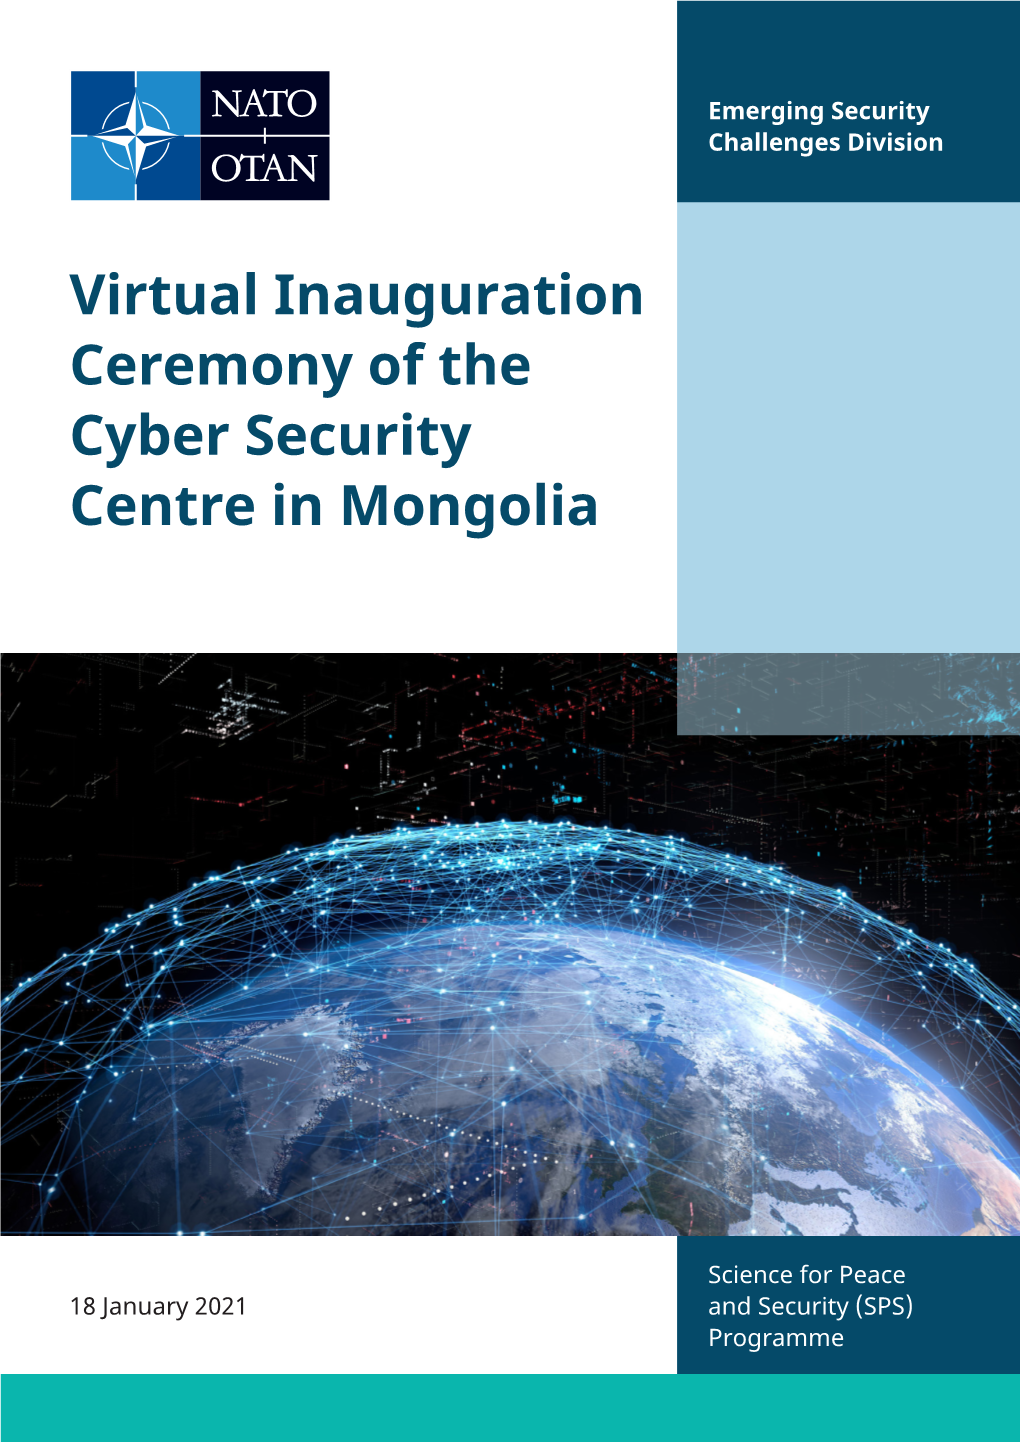 Virtual Inauguration Ceremony of the Cyber Security Centre in Mongolia